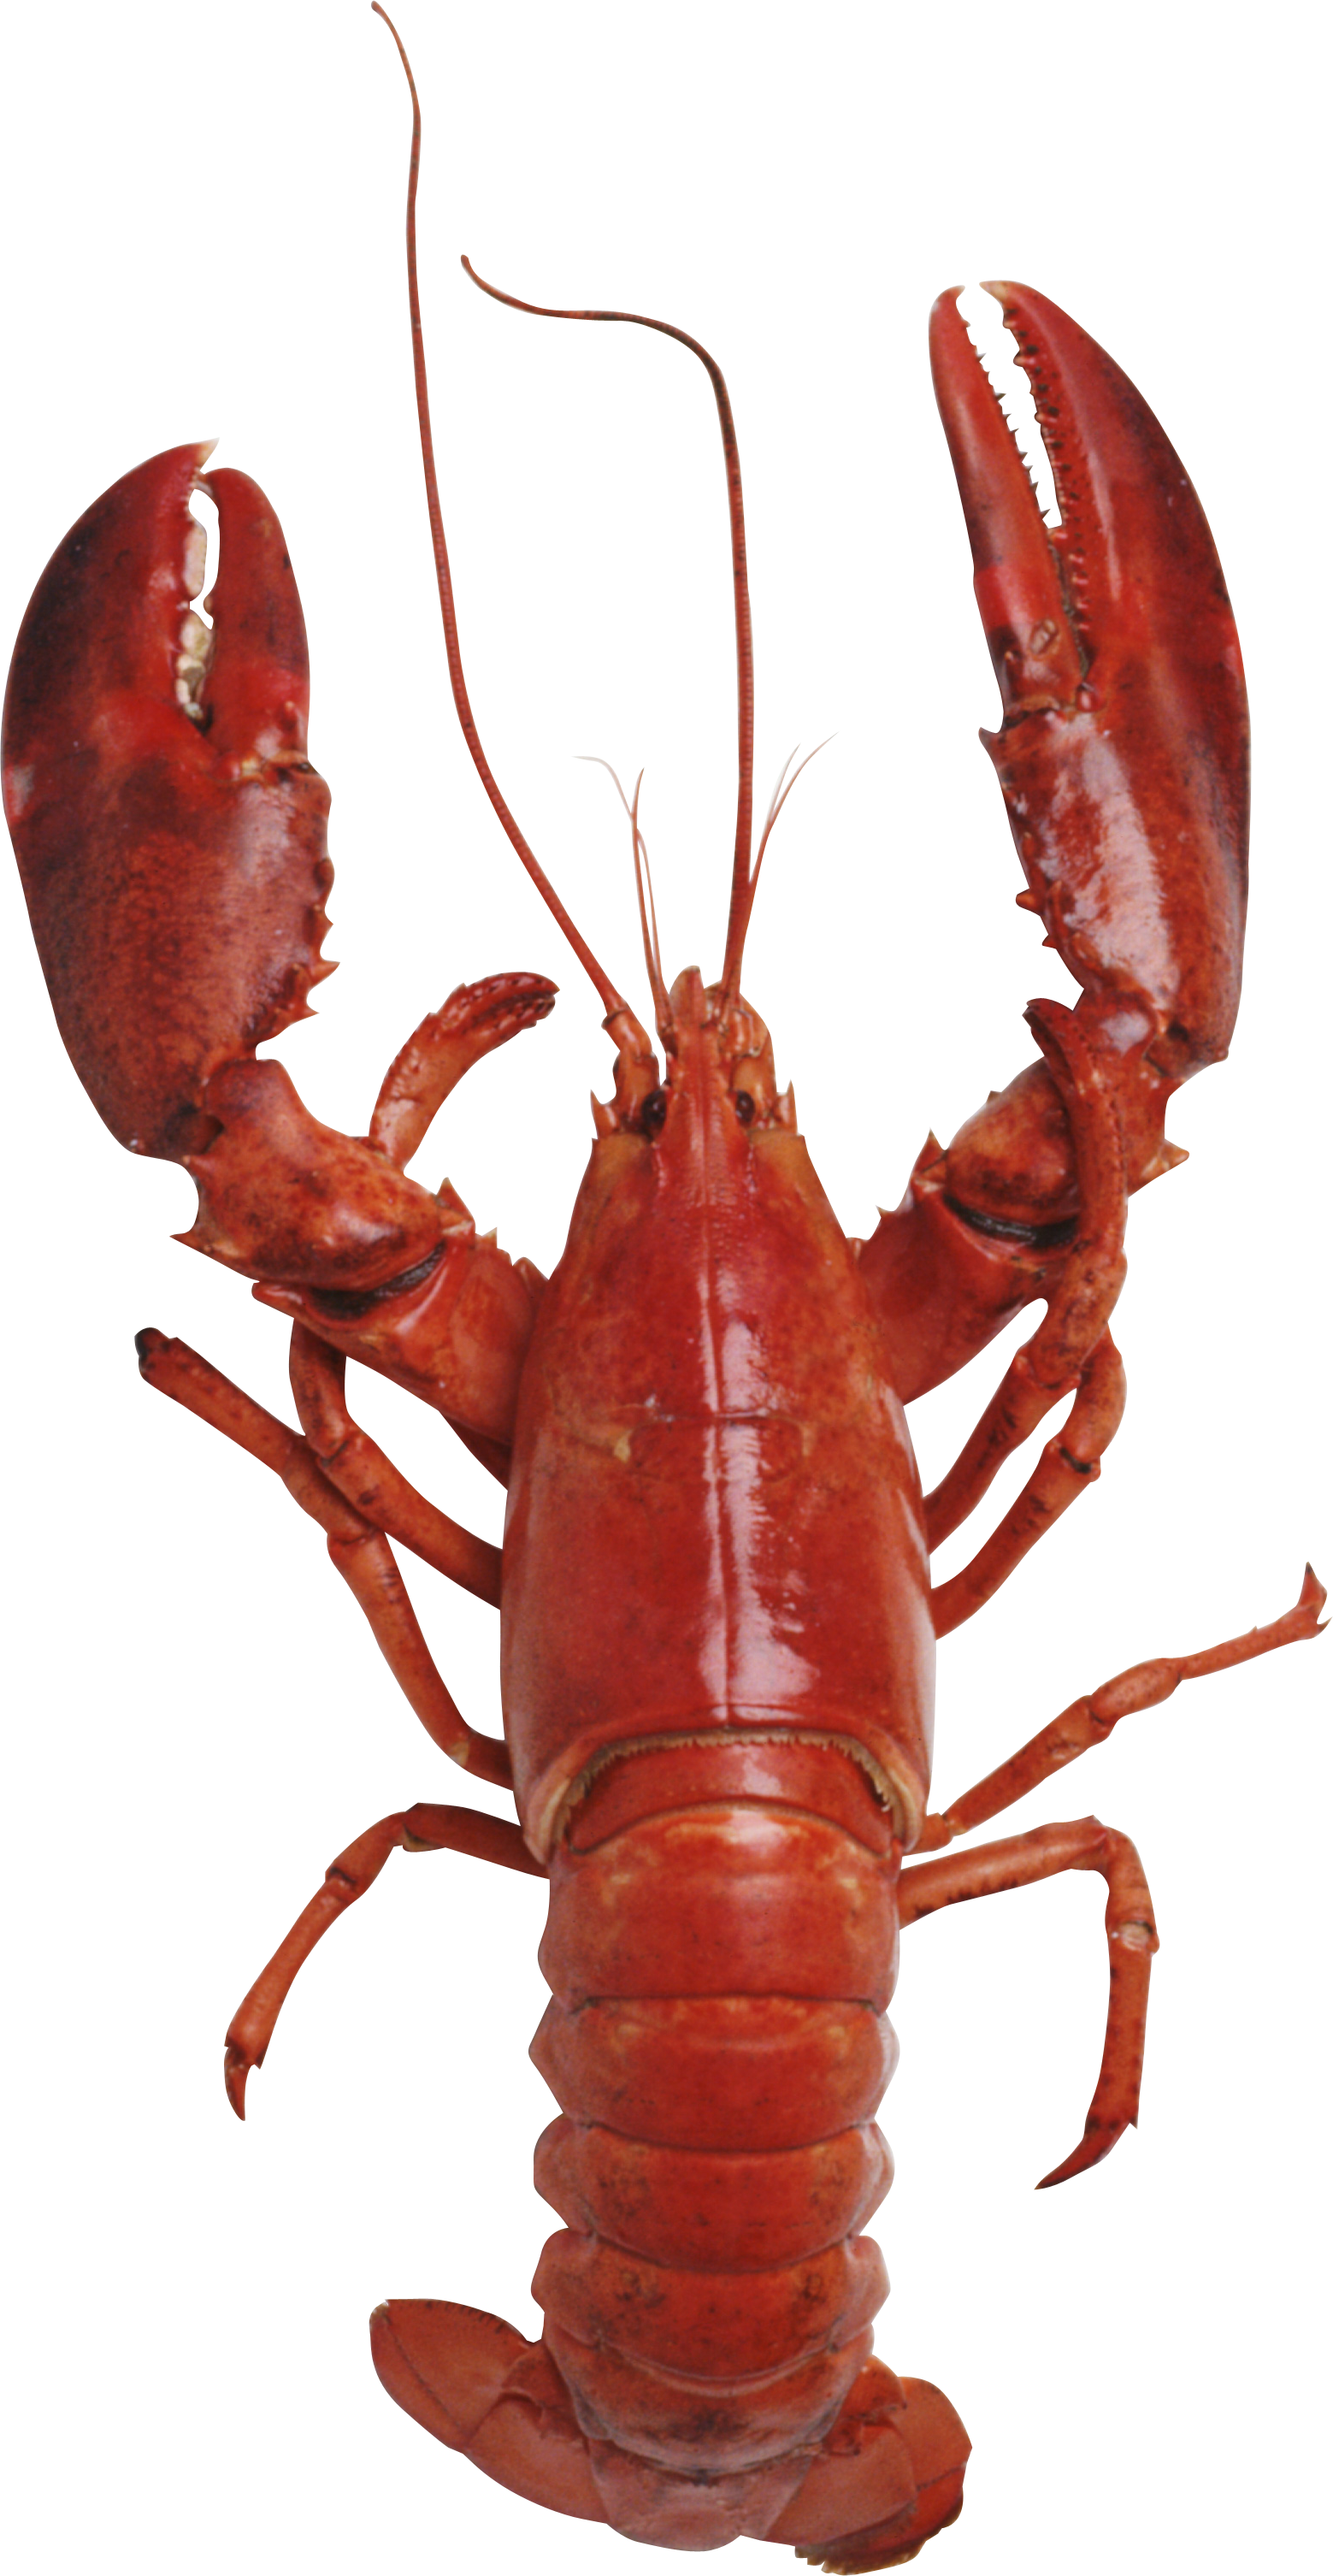 lobster clipart red animal